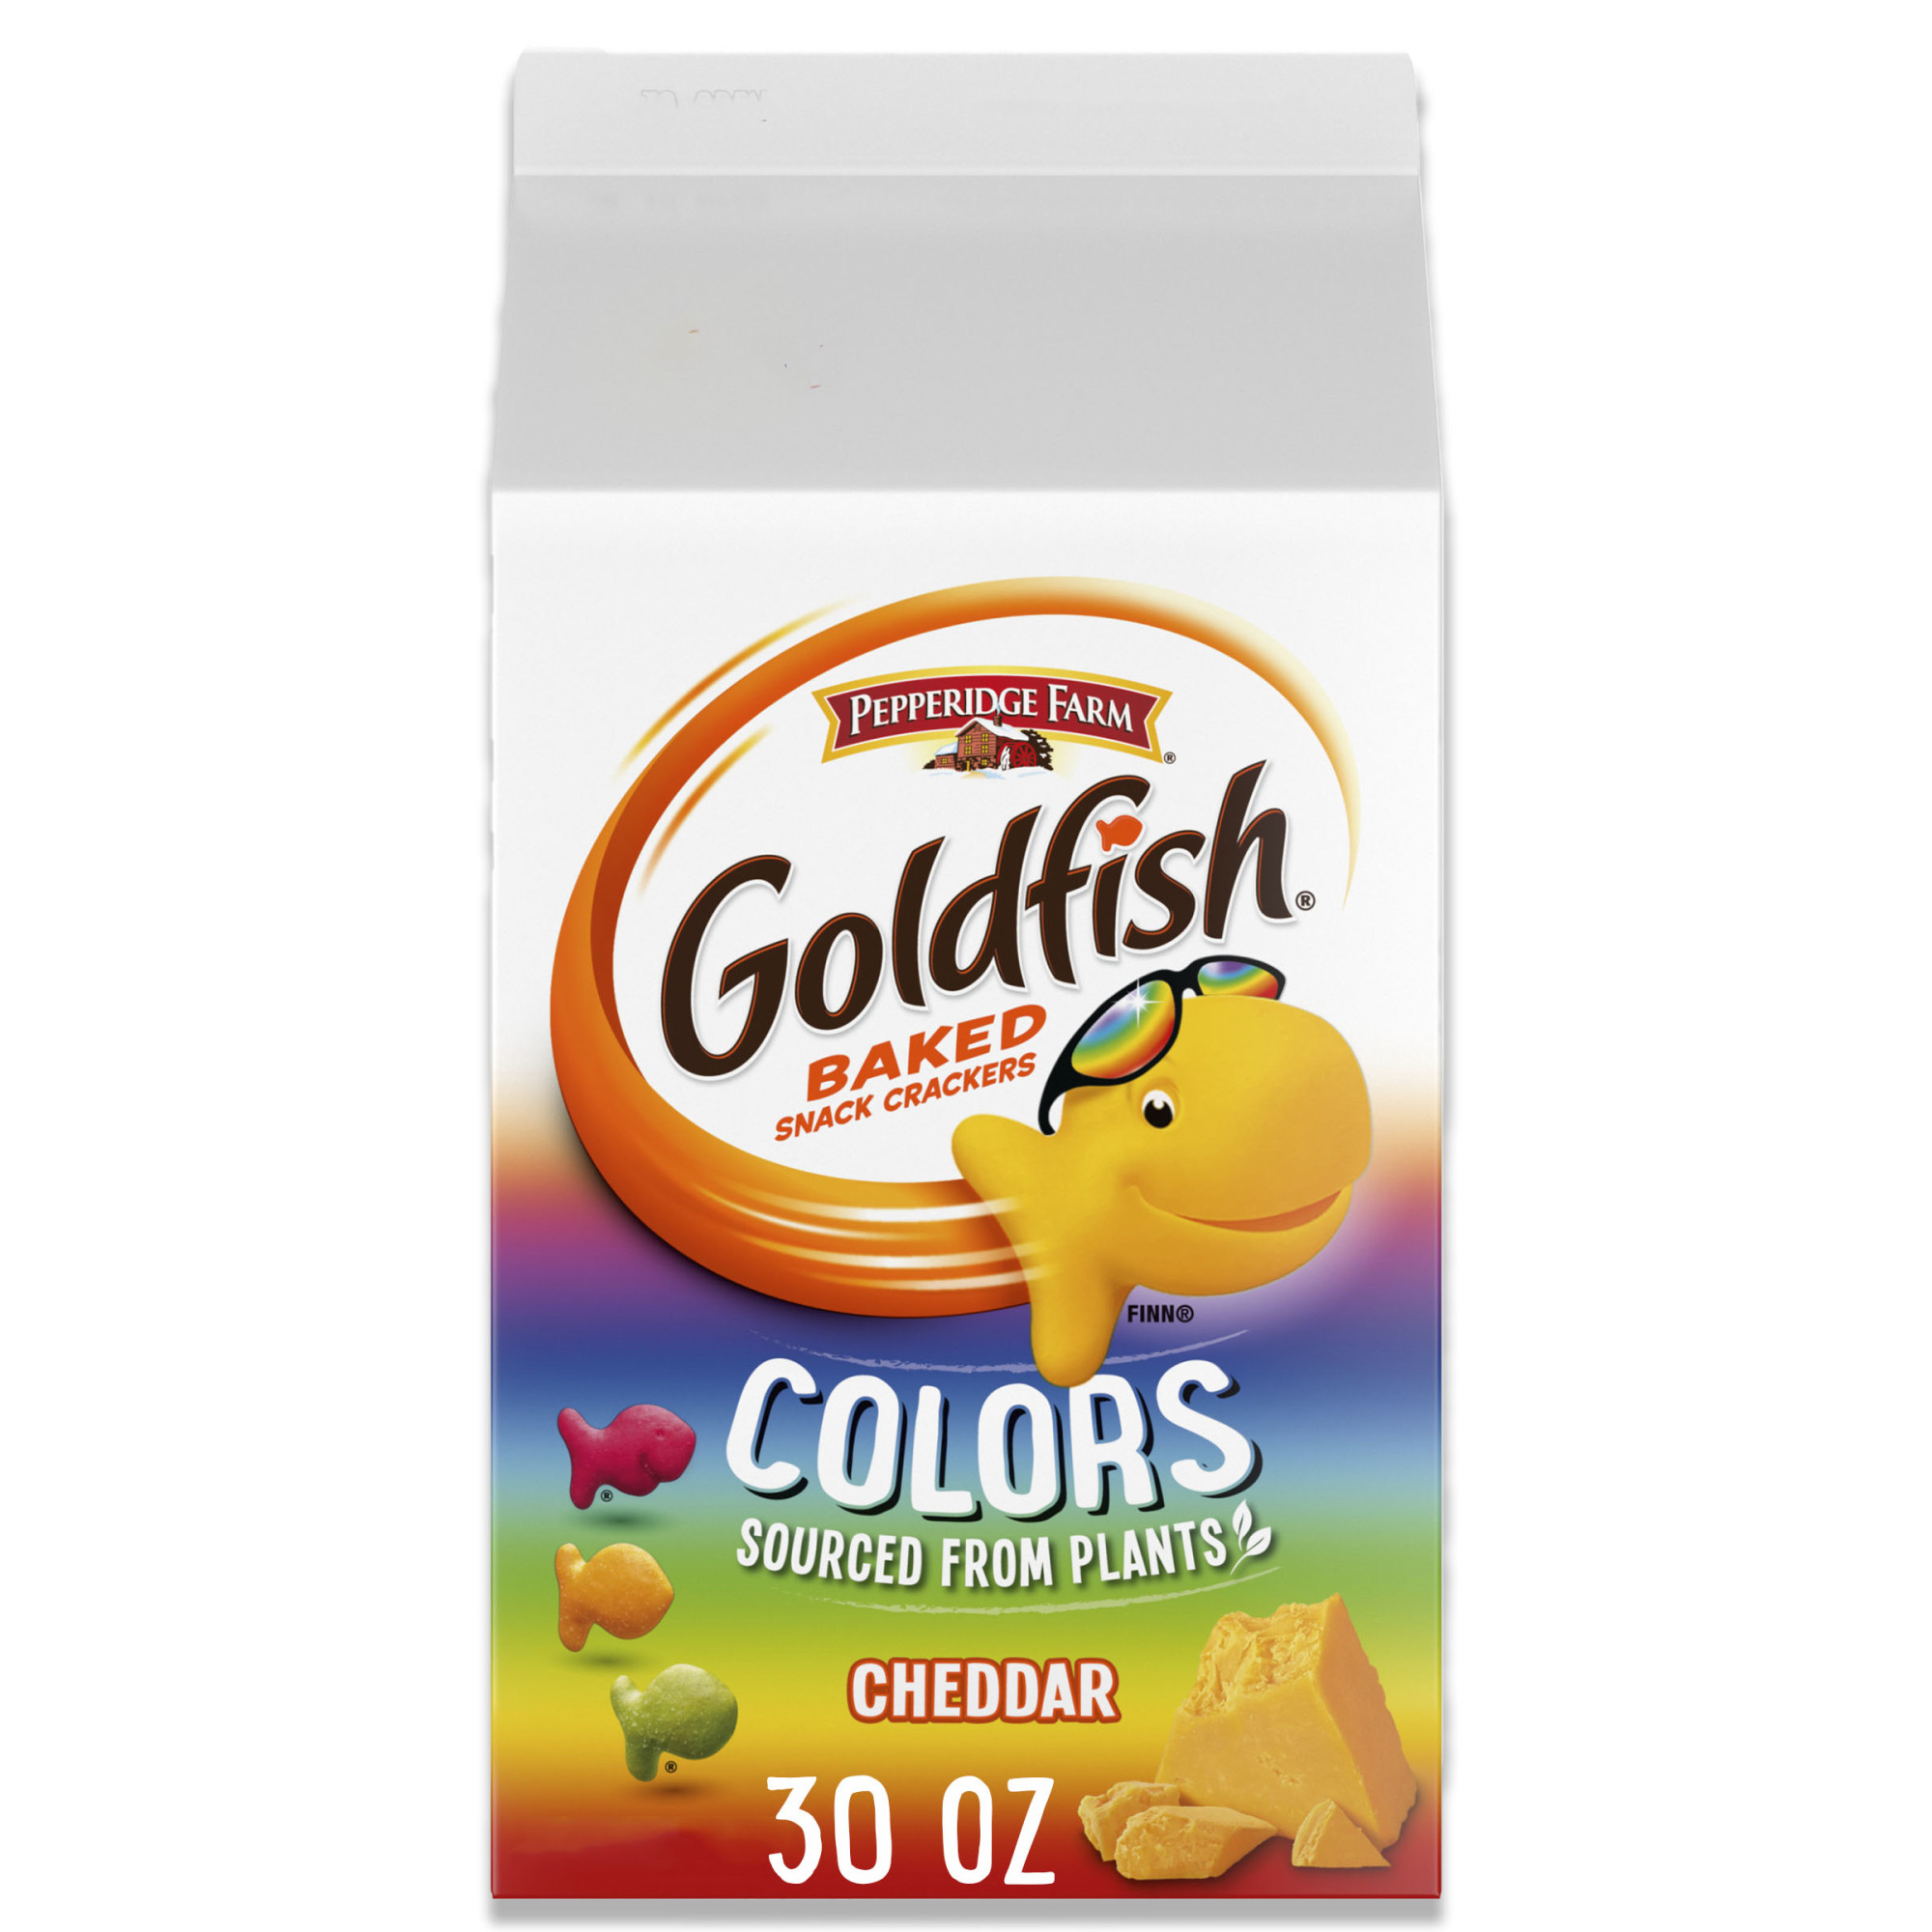 Goldfish Colors Cheddar Cheese Crackers, Baked Snack Crackers, 30 oz Carton - image 1 of 11